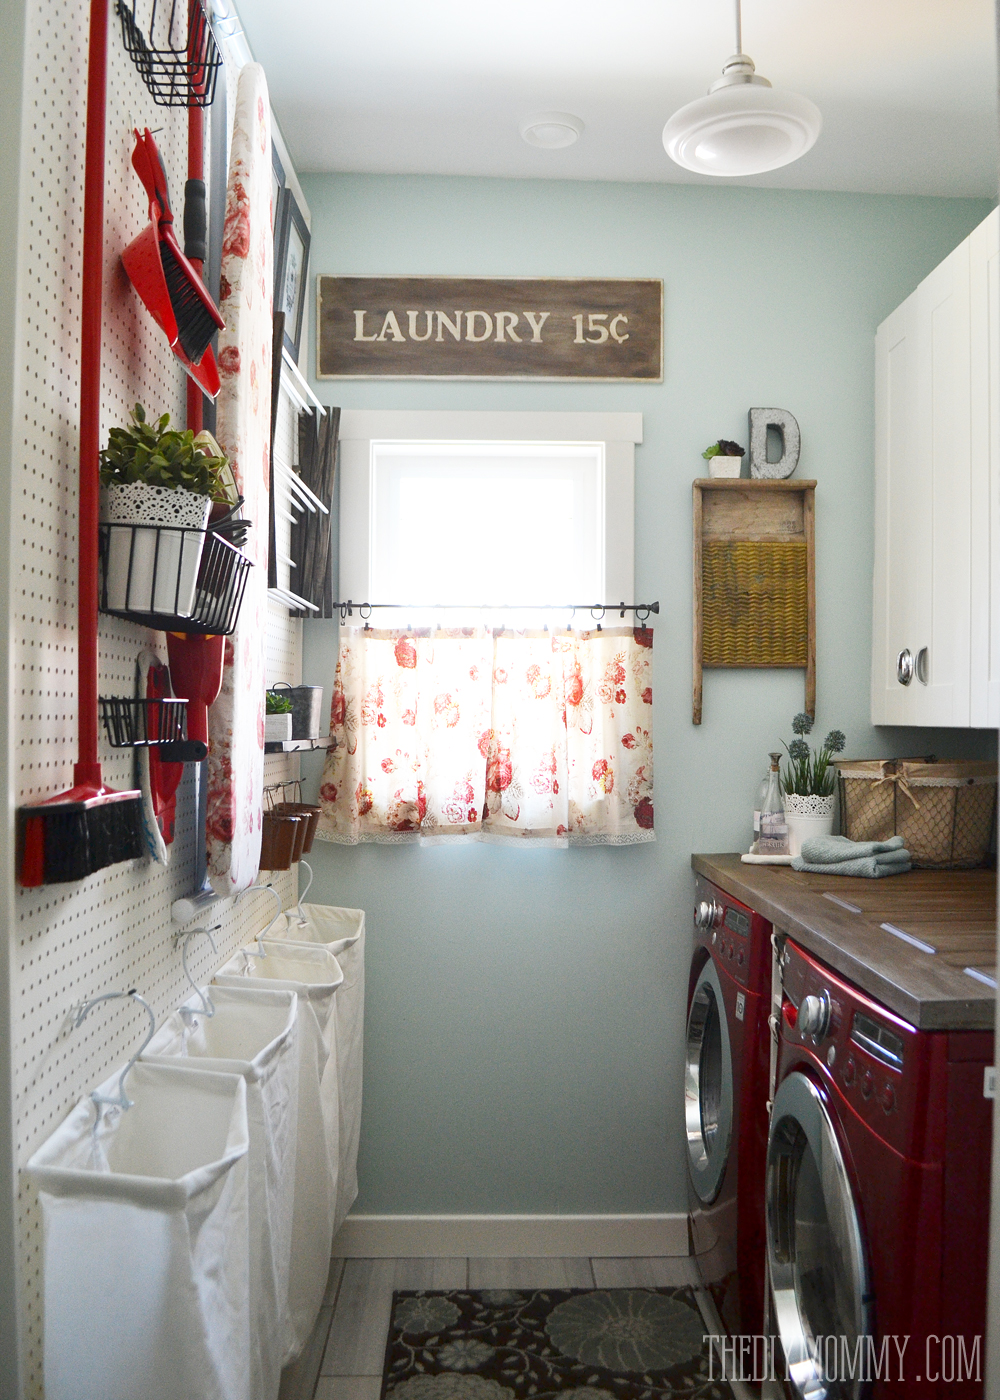 A Vintage Inspired Red & Aqua Laundry Room (+ Video Tour!)